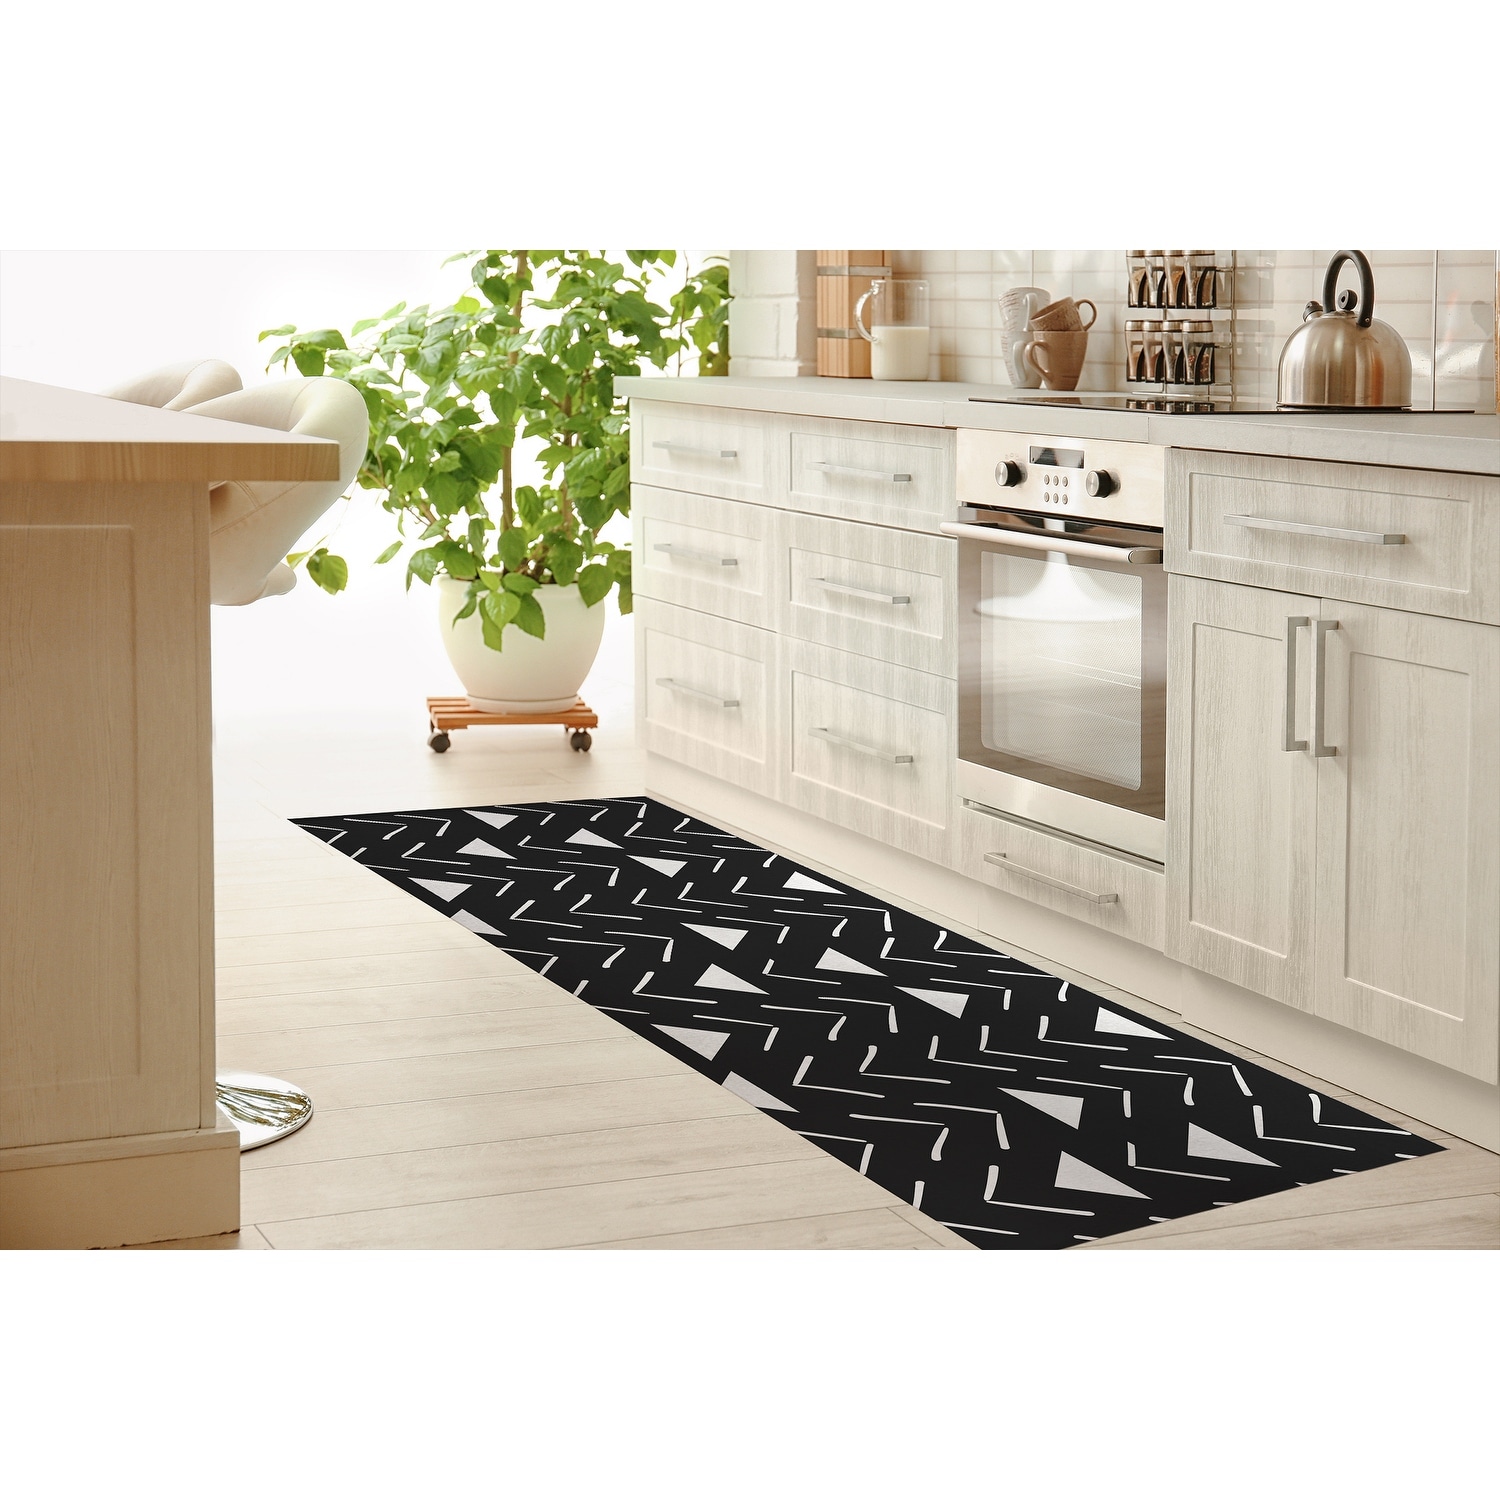 https://ak1.ostkcdn.com/images/products/is/images/direct/e10092a6641aed484fa870dd14ad4916e273809f/MUD-CLOTH-BW-Kitchen-Mat-By-Becky-Bailey.jpg